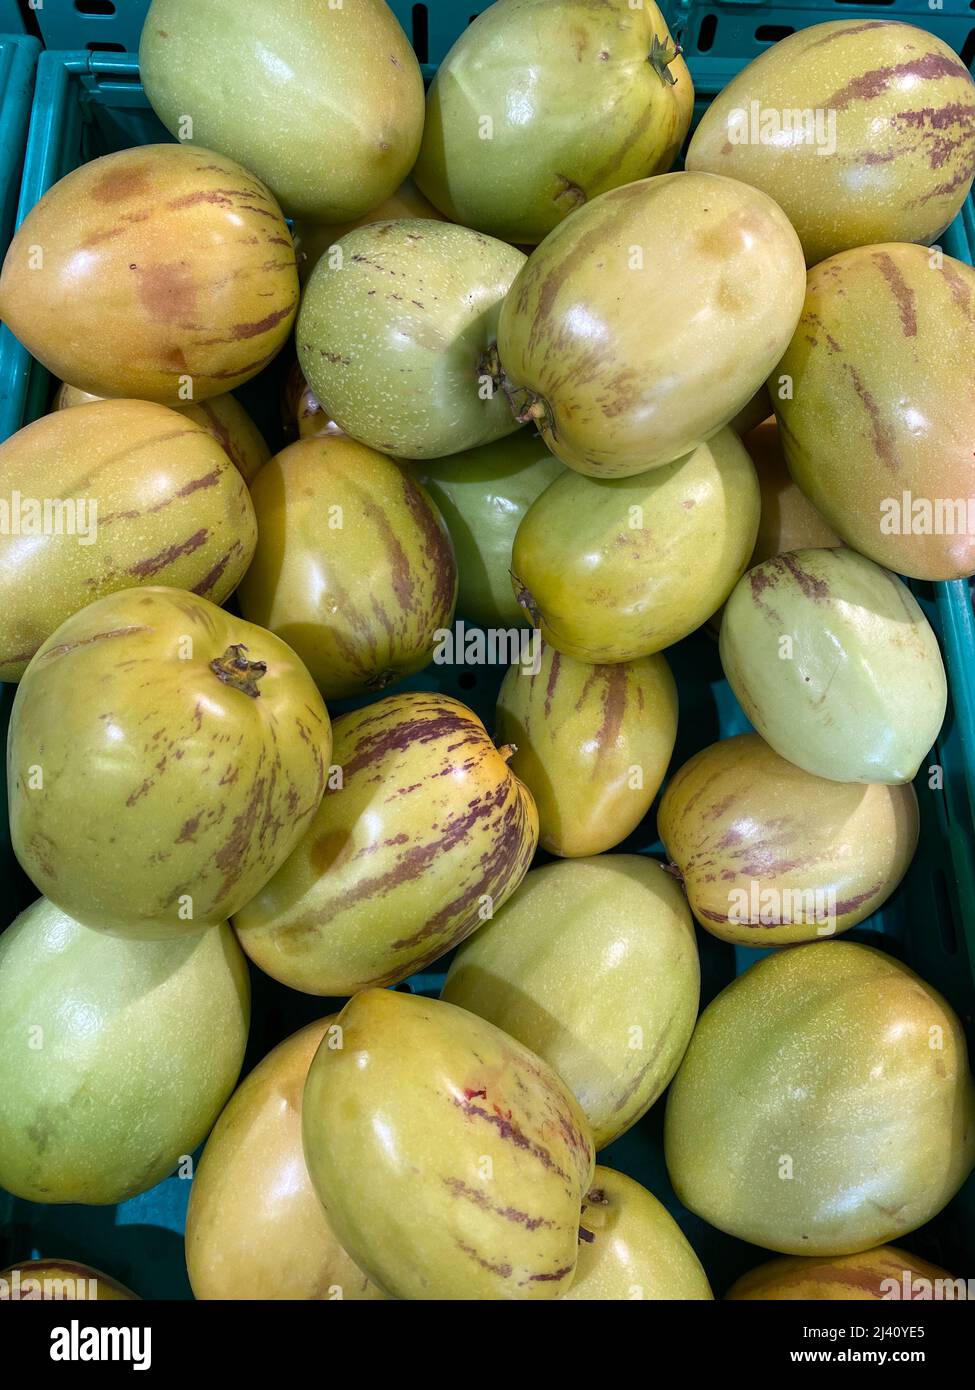 Stack of Fresh Pepino Melon Fruit for Sale at Market. Solanum Muricatum. Ready to Eat. Stock Photo